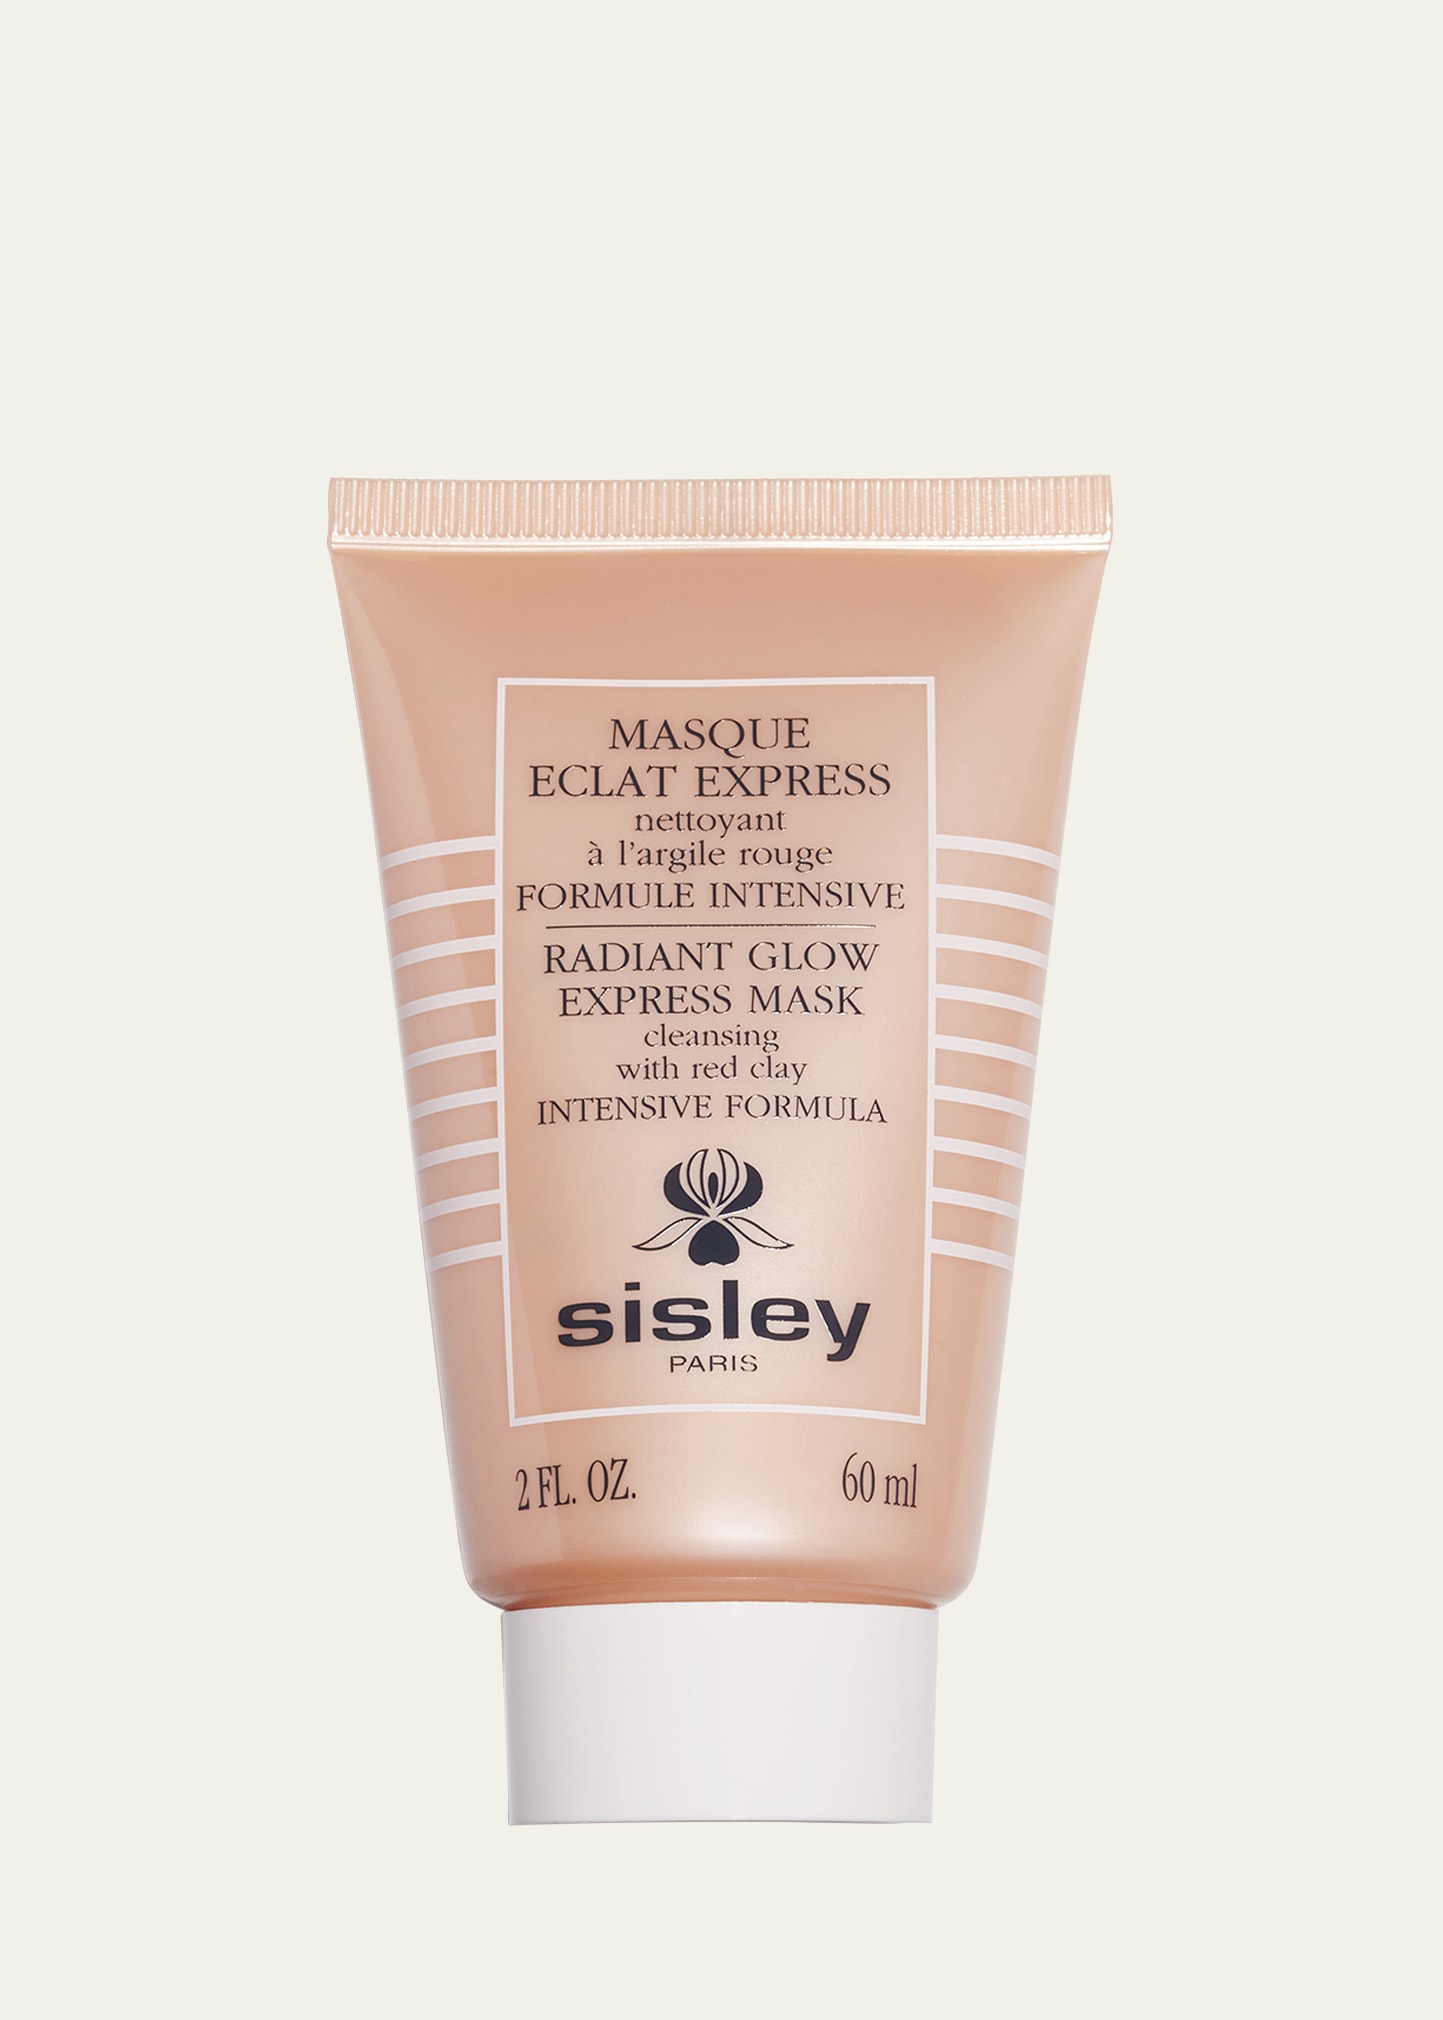 Sisley-Paris Radiant Express Mask with Red Clay, 2 oz./ 60 mL - Bergdorf Goodman